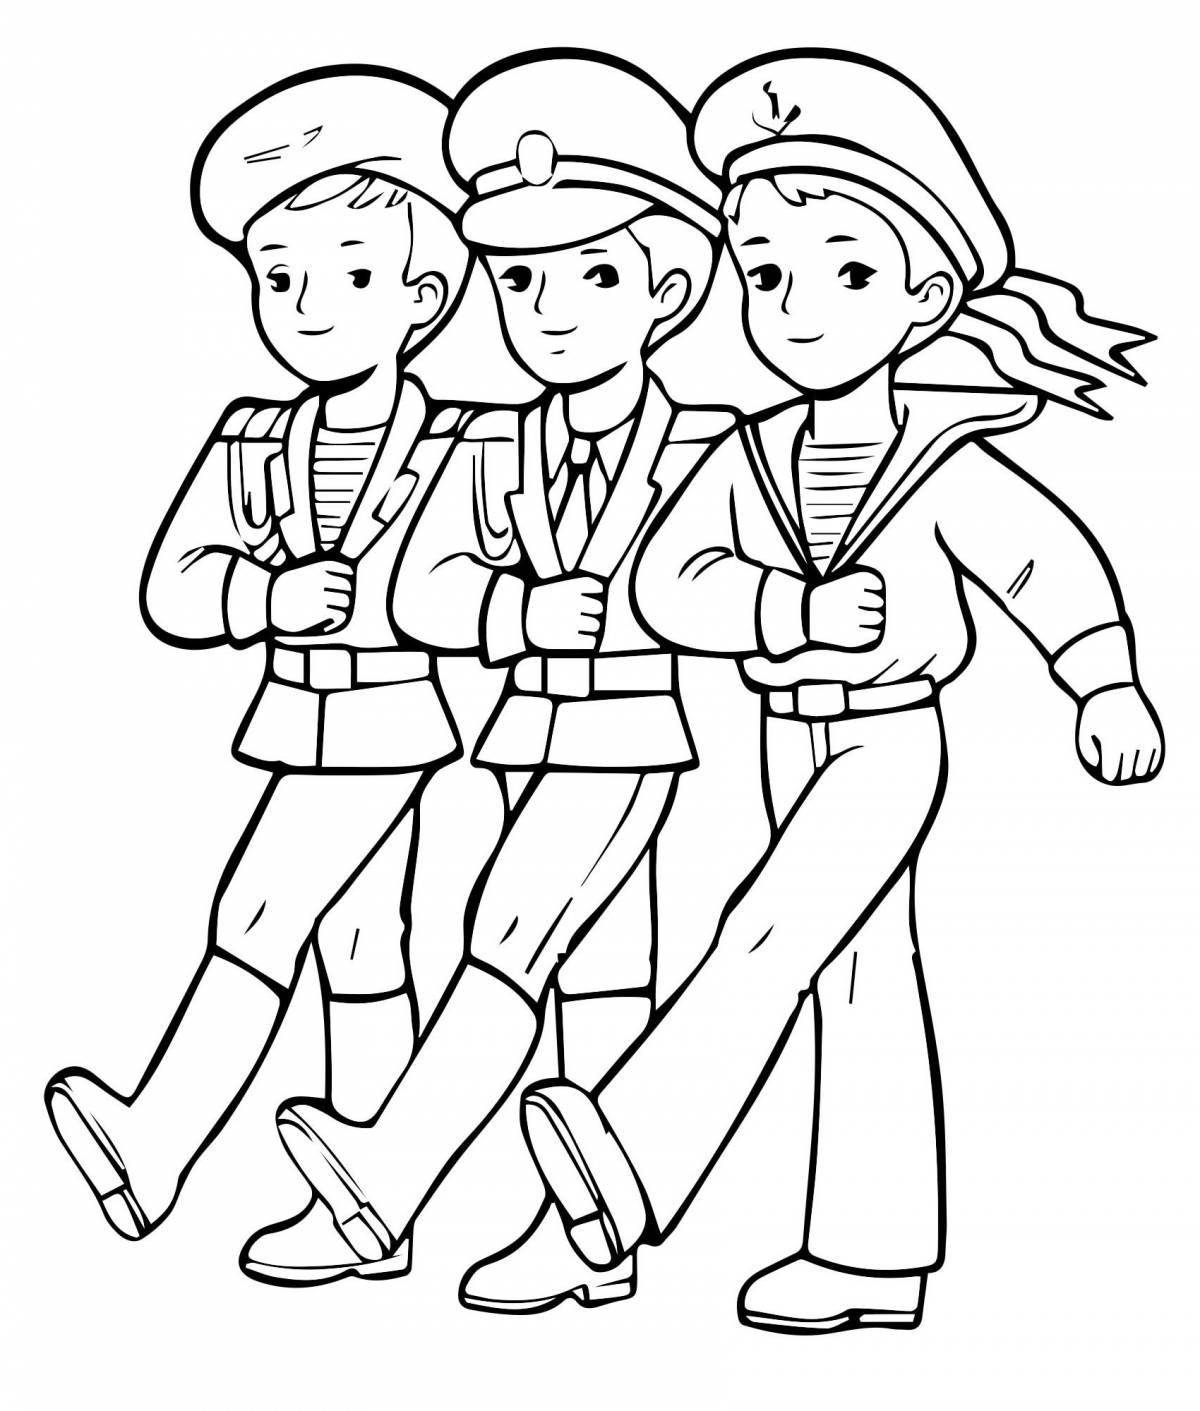 Glorious soldiers coloring book for children 6-7 years old